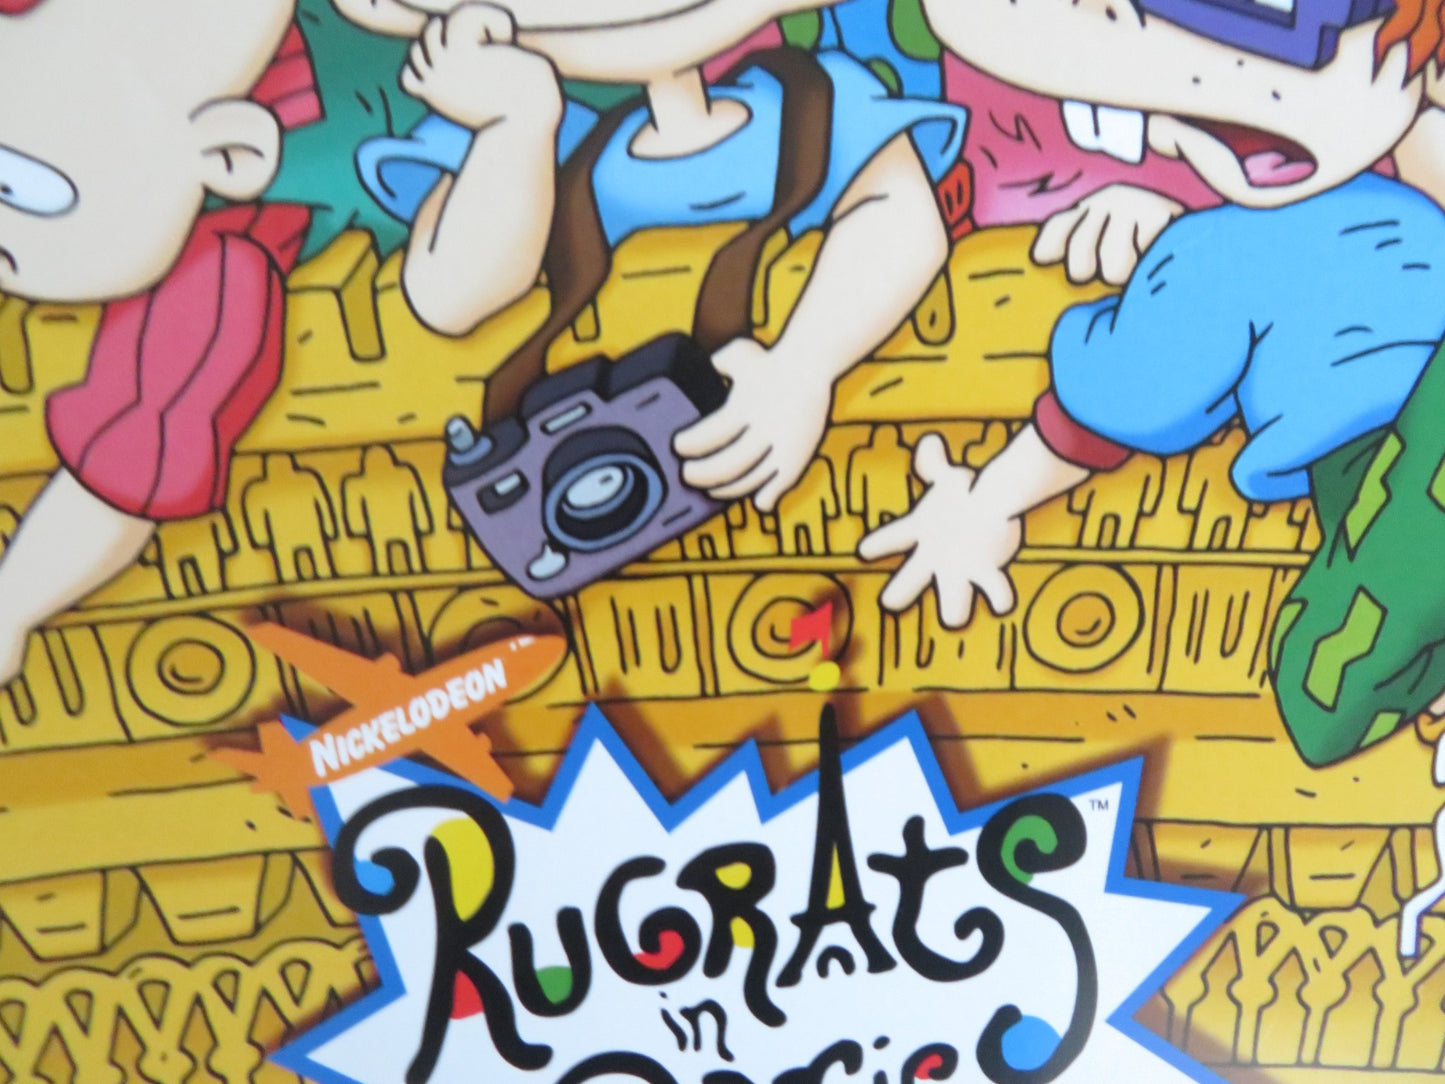 RUGRATS IN PARIS THE MOVIE VHS & DVD VIDEO POSTER ELIZABETH DAILY T. STRONG 2000